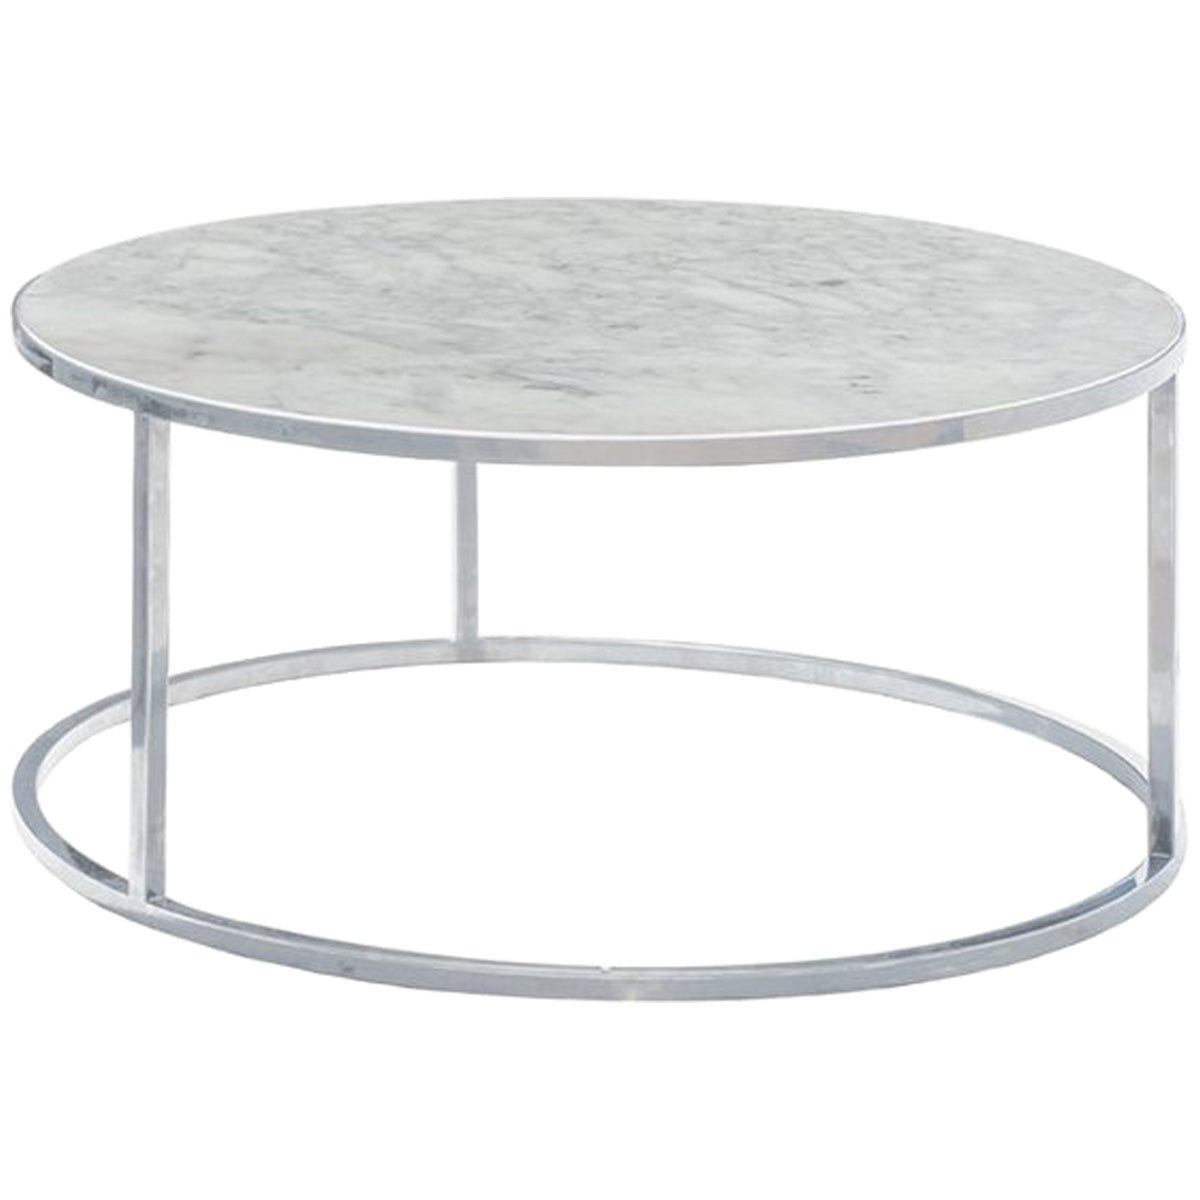 Lillian August Milos Round Outdoor Cocktail Table